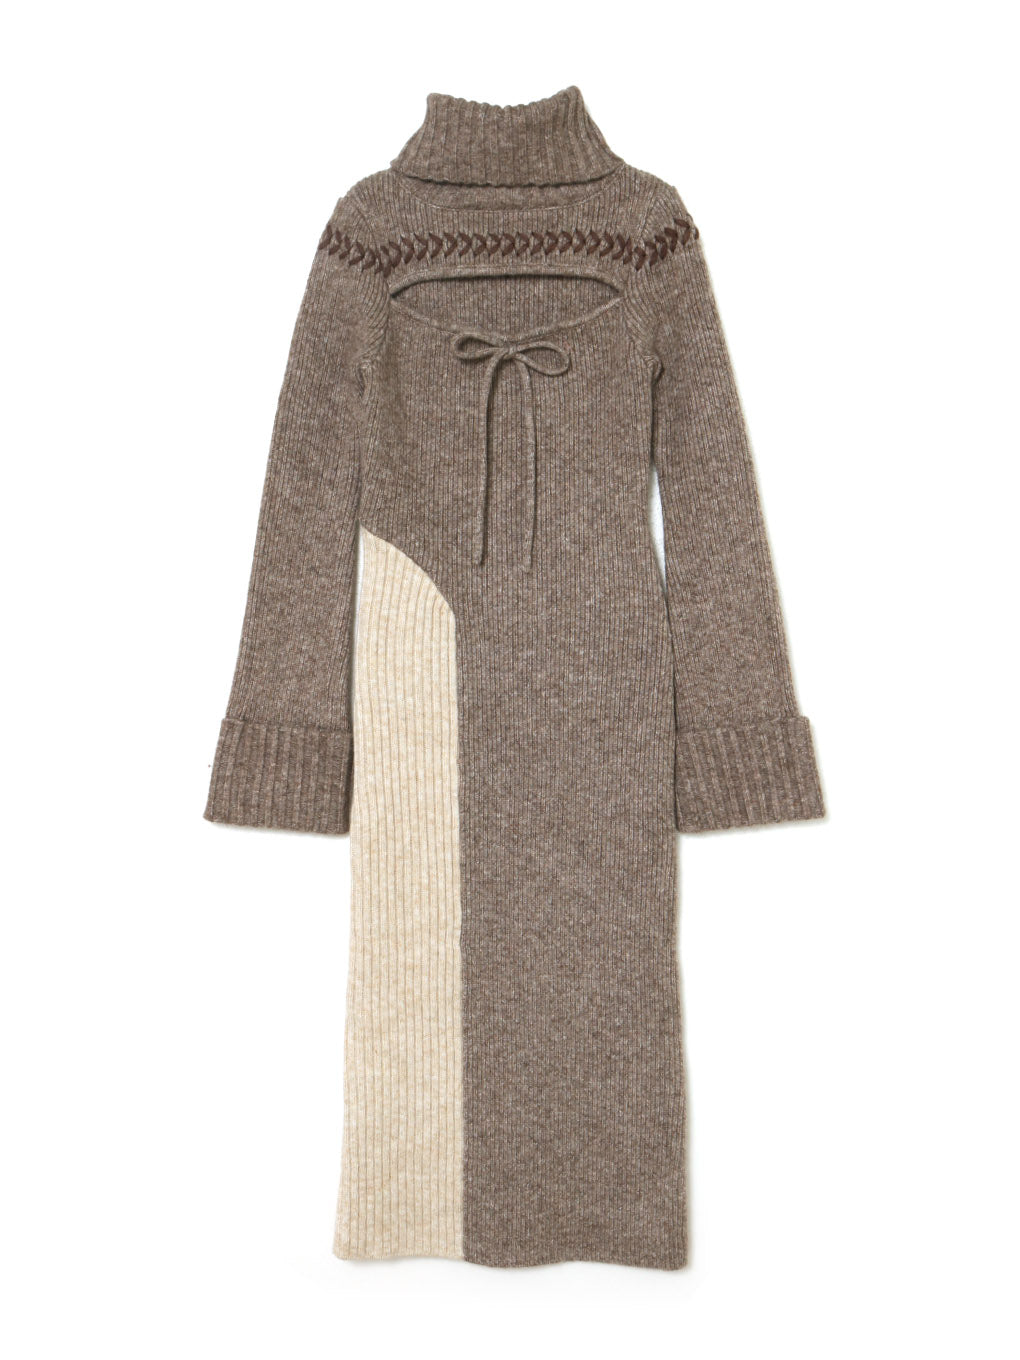 ANDMARY】Sophie knit long dress